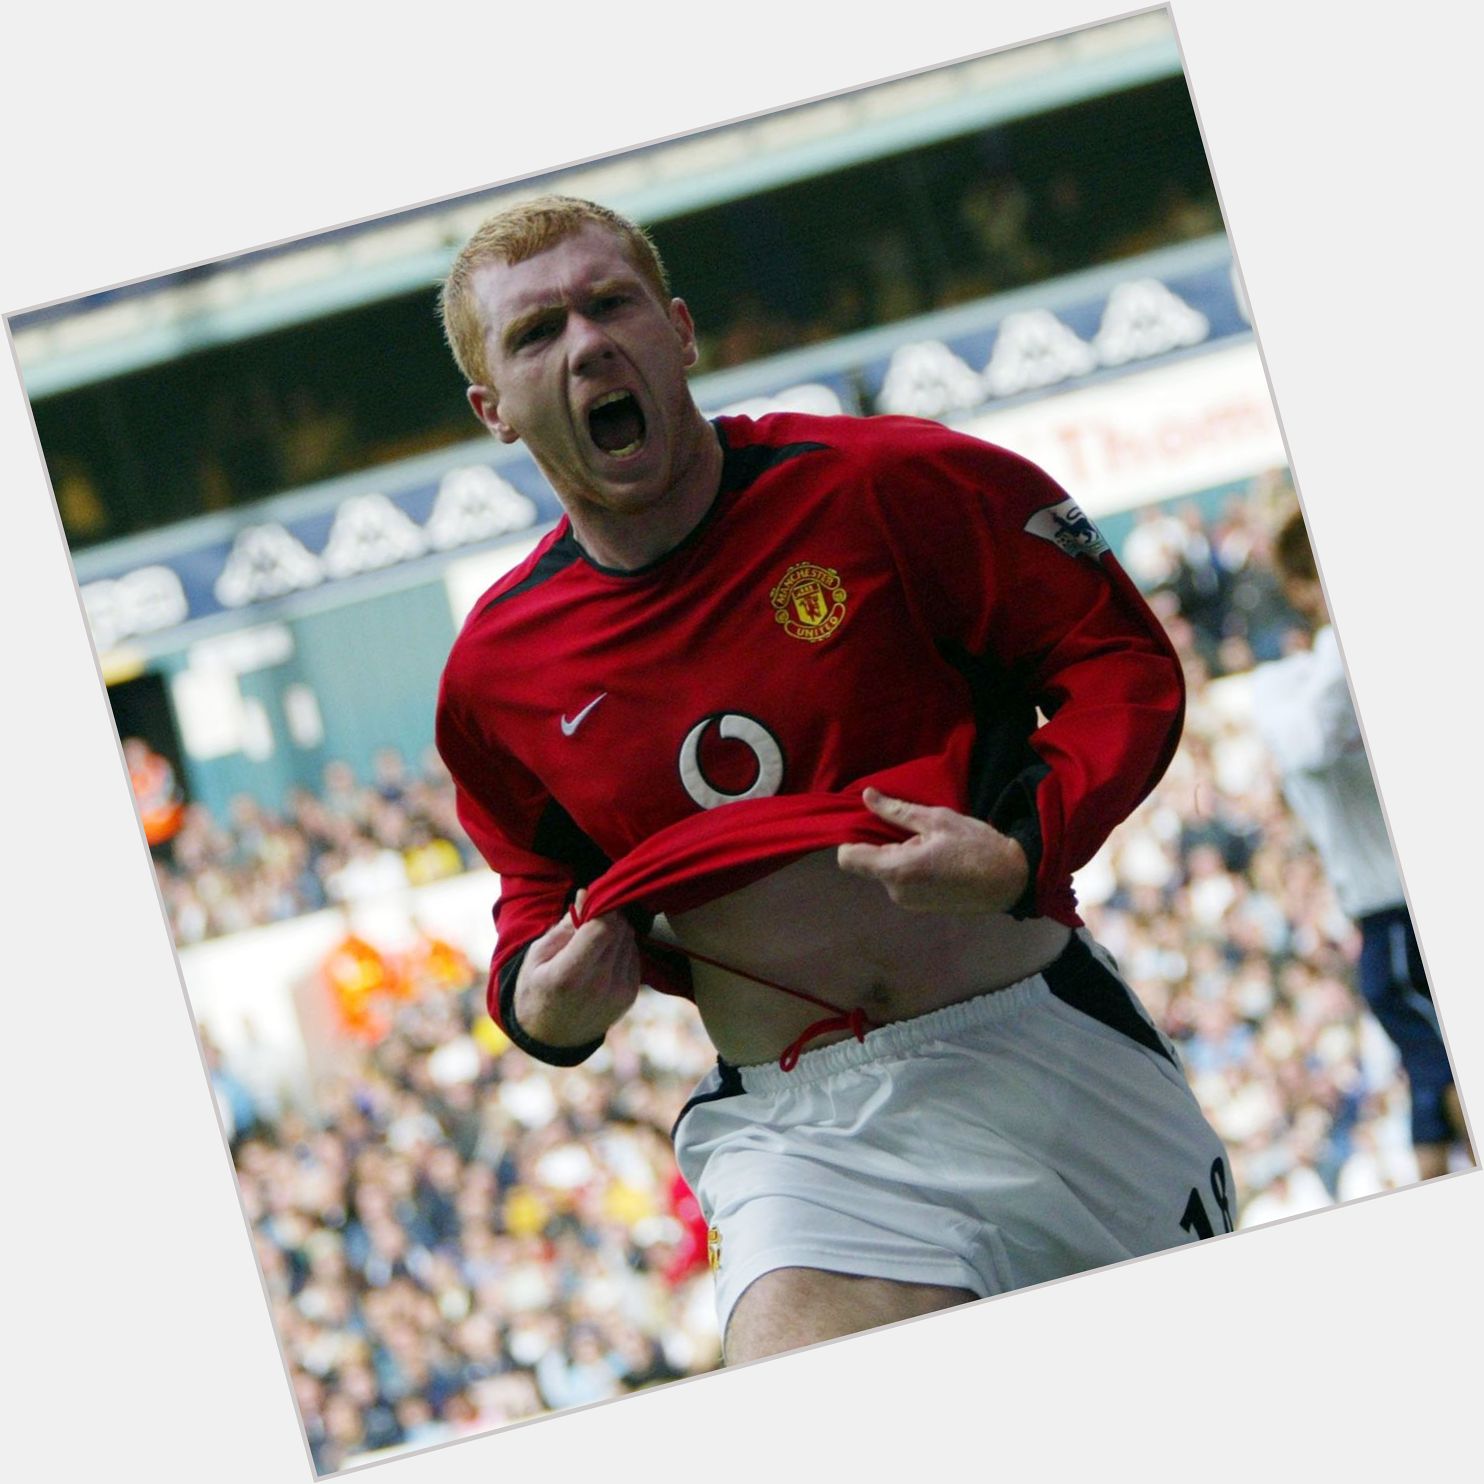 Happy Birthday to Paul Scholes, here he is getting a vital goal at White Heart Lane in the 2003 title race. 